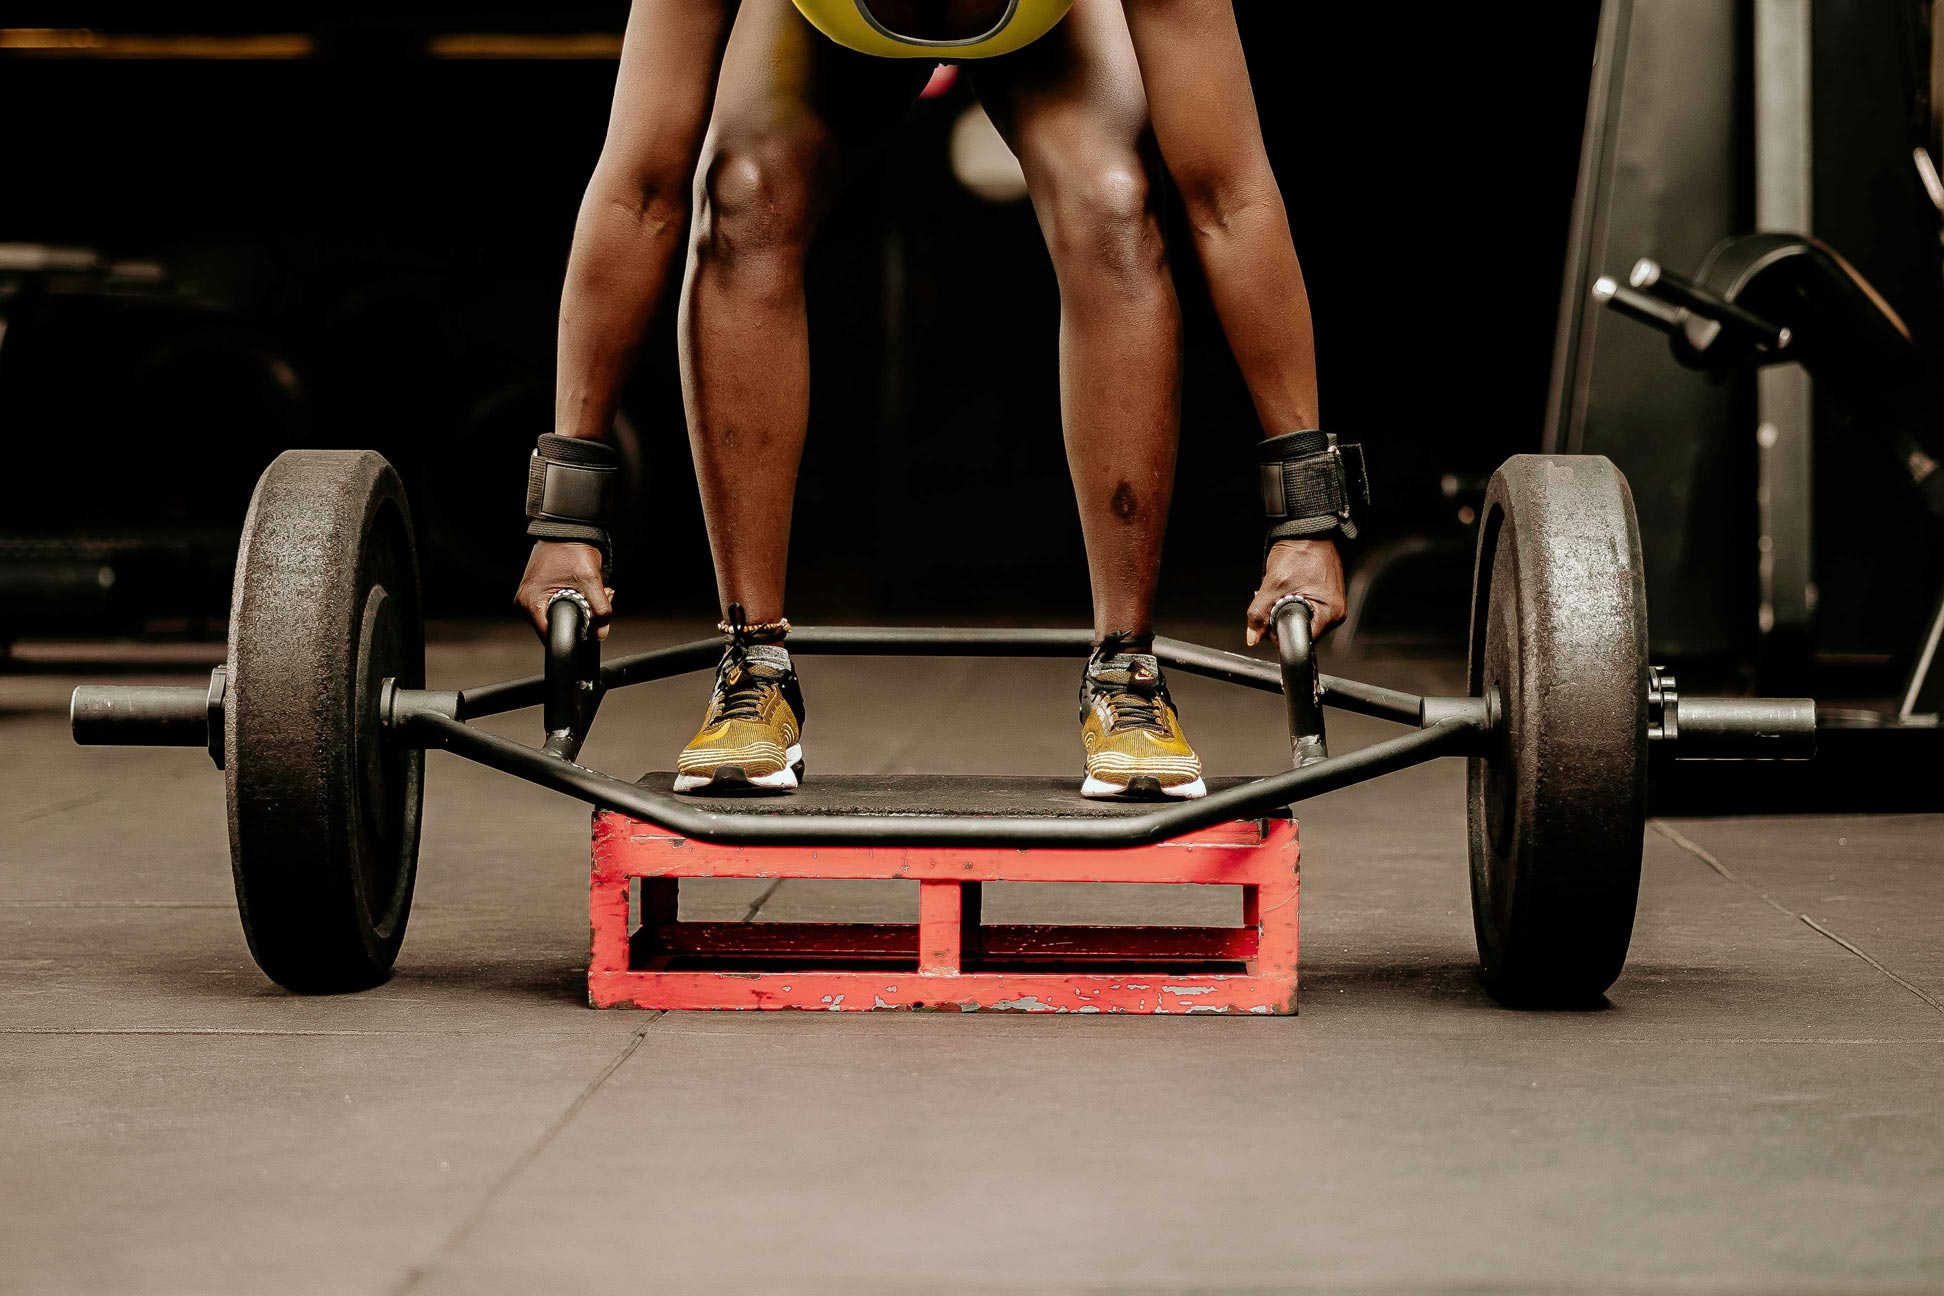 Fitness enthusiast performing deadlifts with a hexagonal trap bar on a red platform, in a well-equipped home gym setting